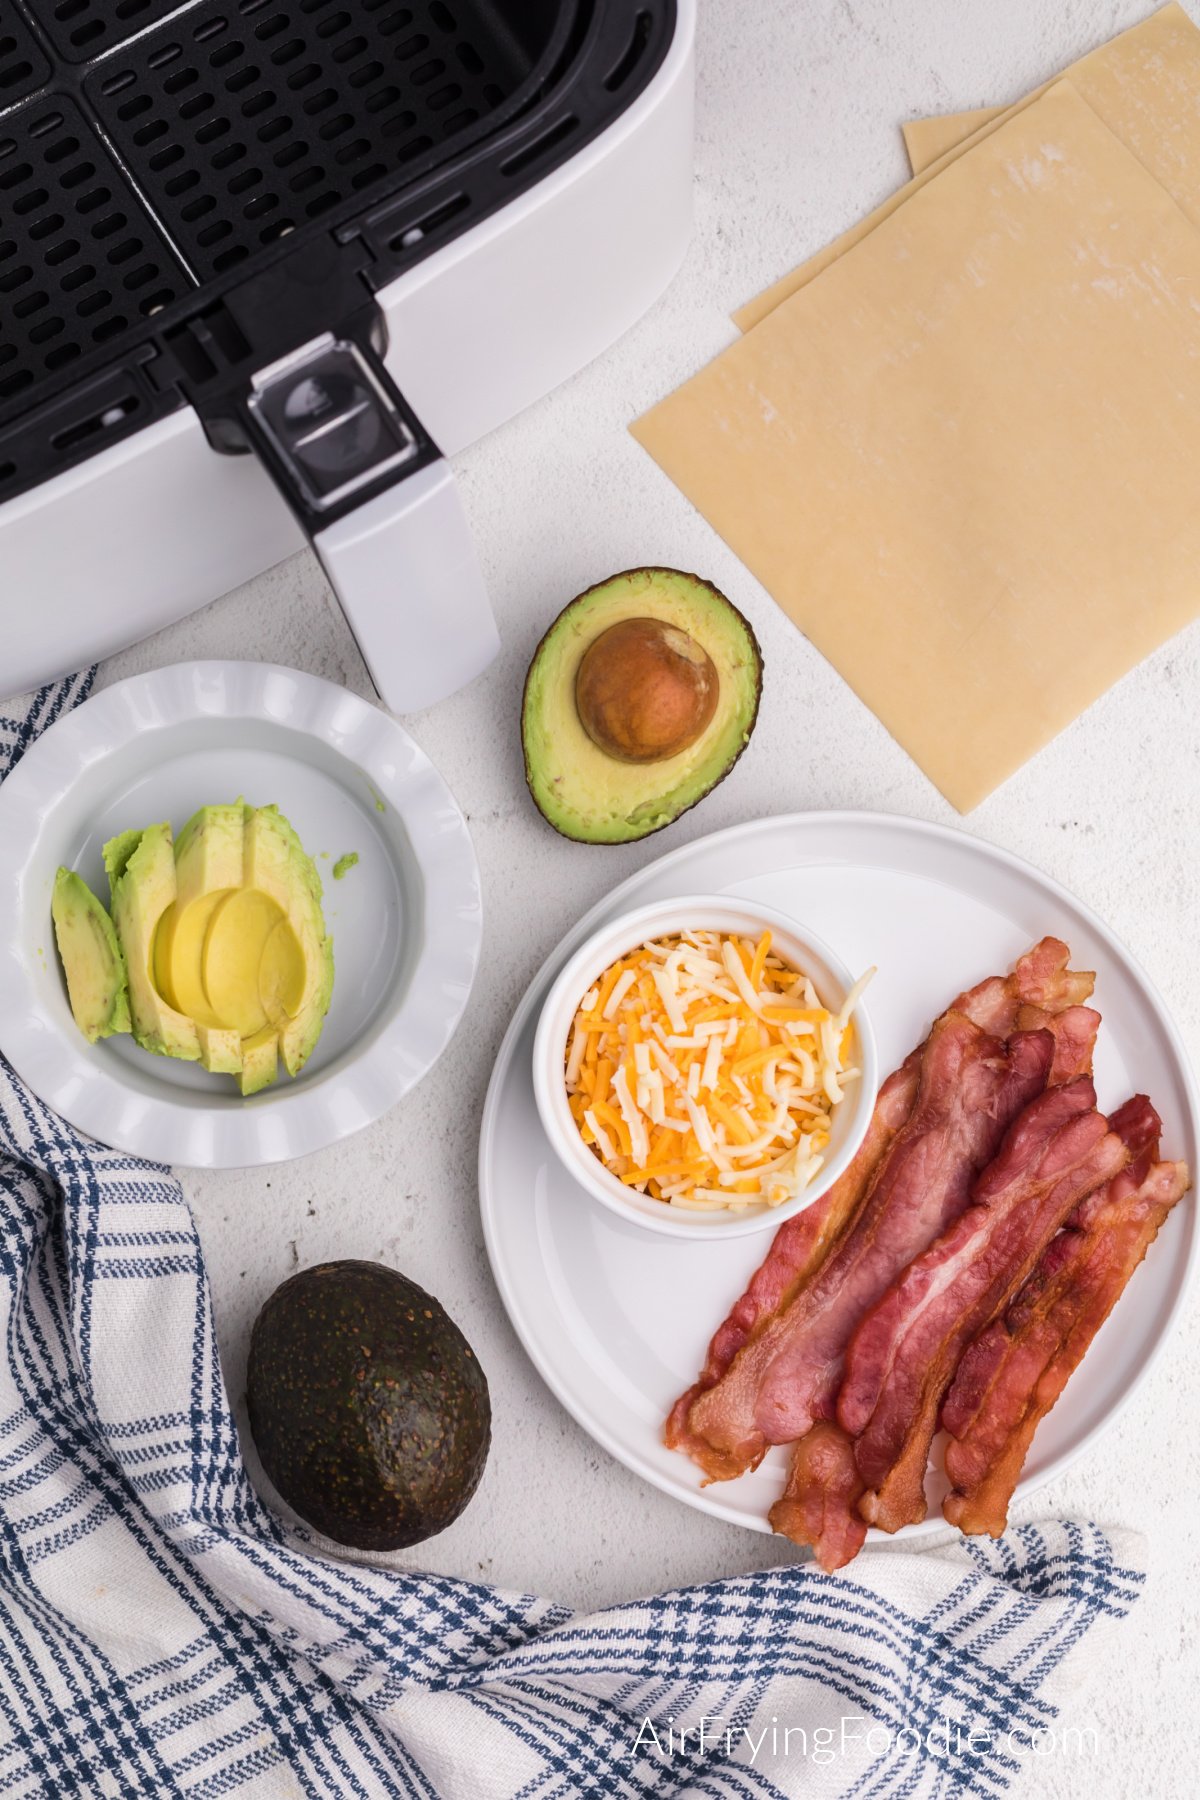 plate with cooked bacon, shredded cheese, bowl with sliced avocado, and avocados and egg roll wrappers in a table.